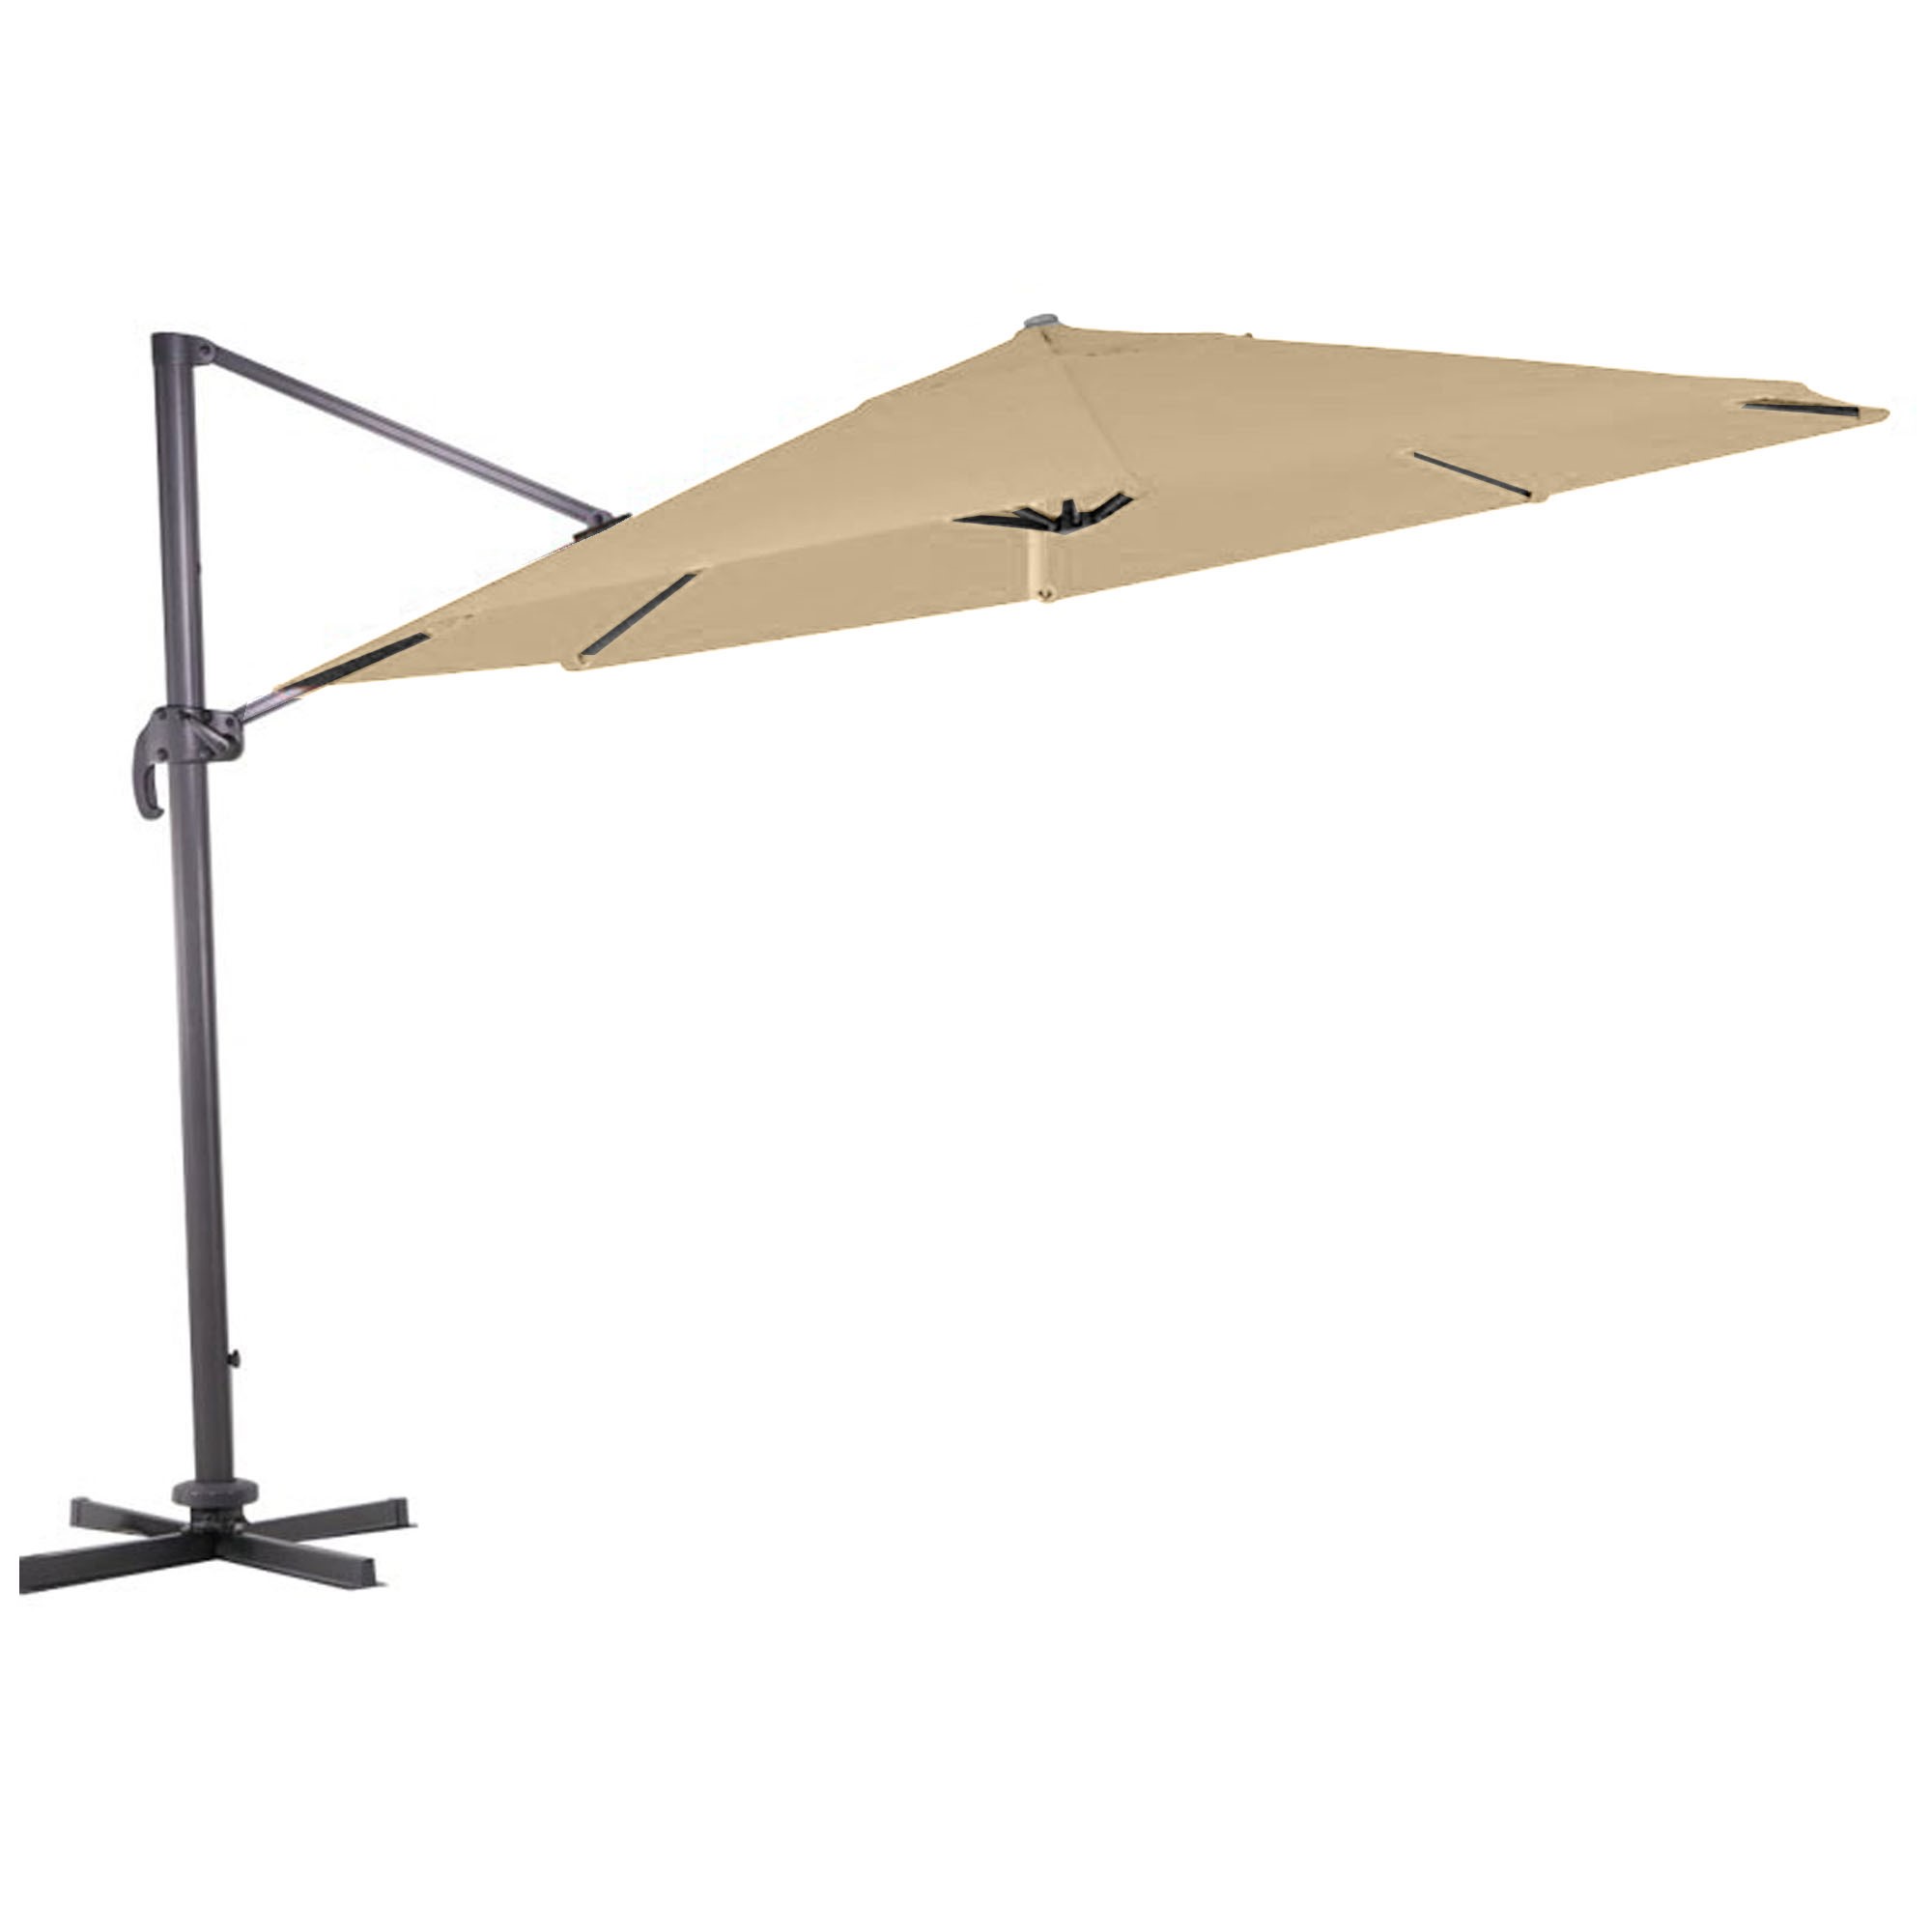 Replacement Canopy for JYSK Helena Offset Umbrella